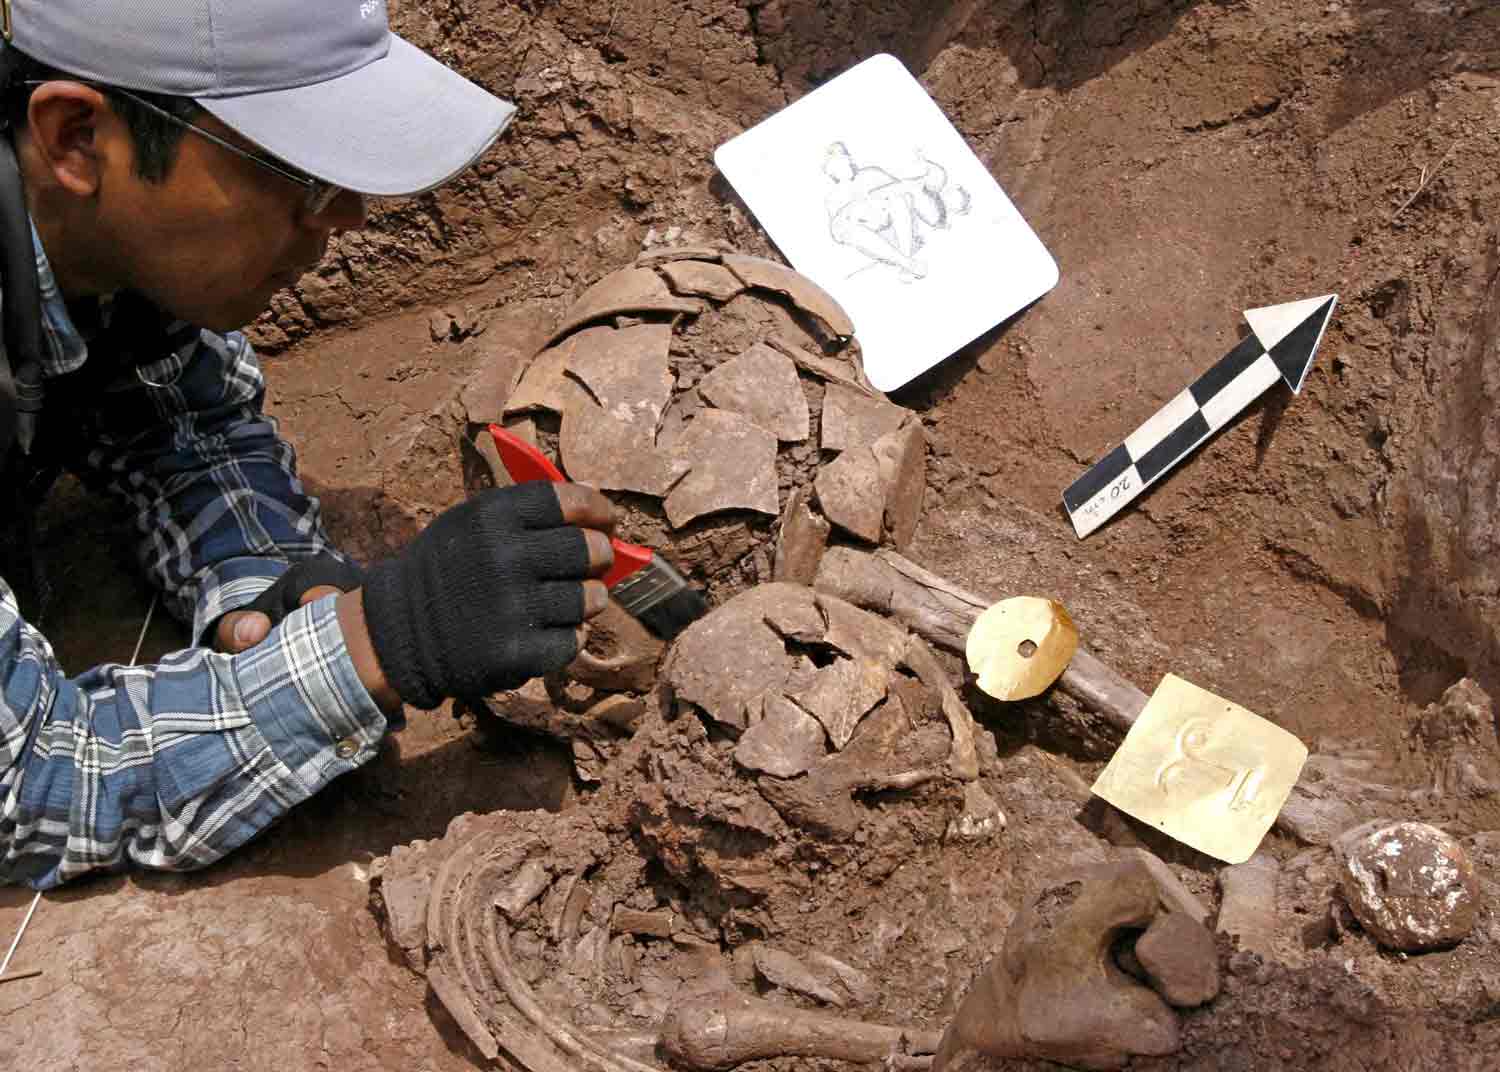 A man lies on his stomach and applies a brush to an object at an archaeological site.